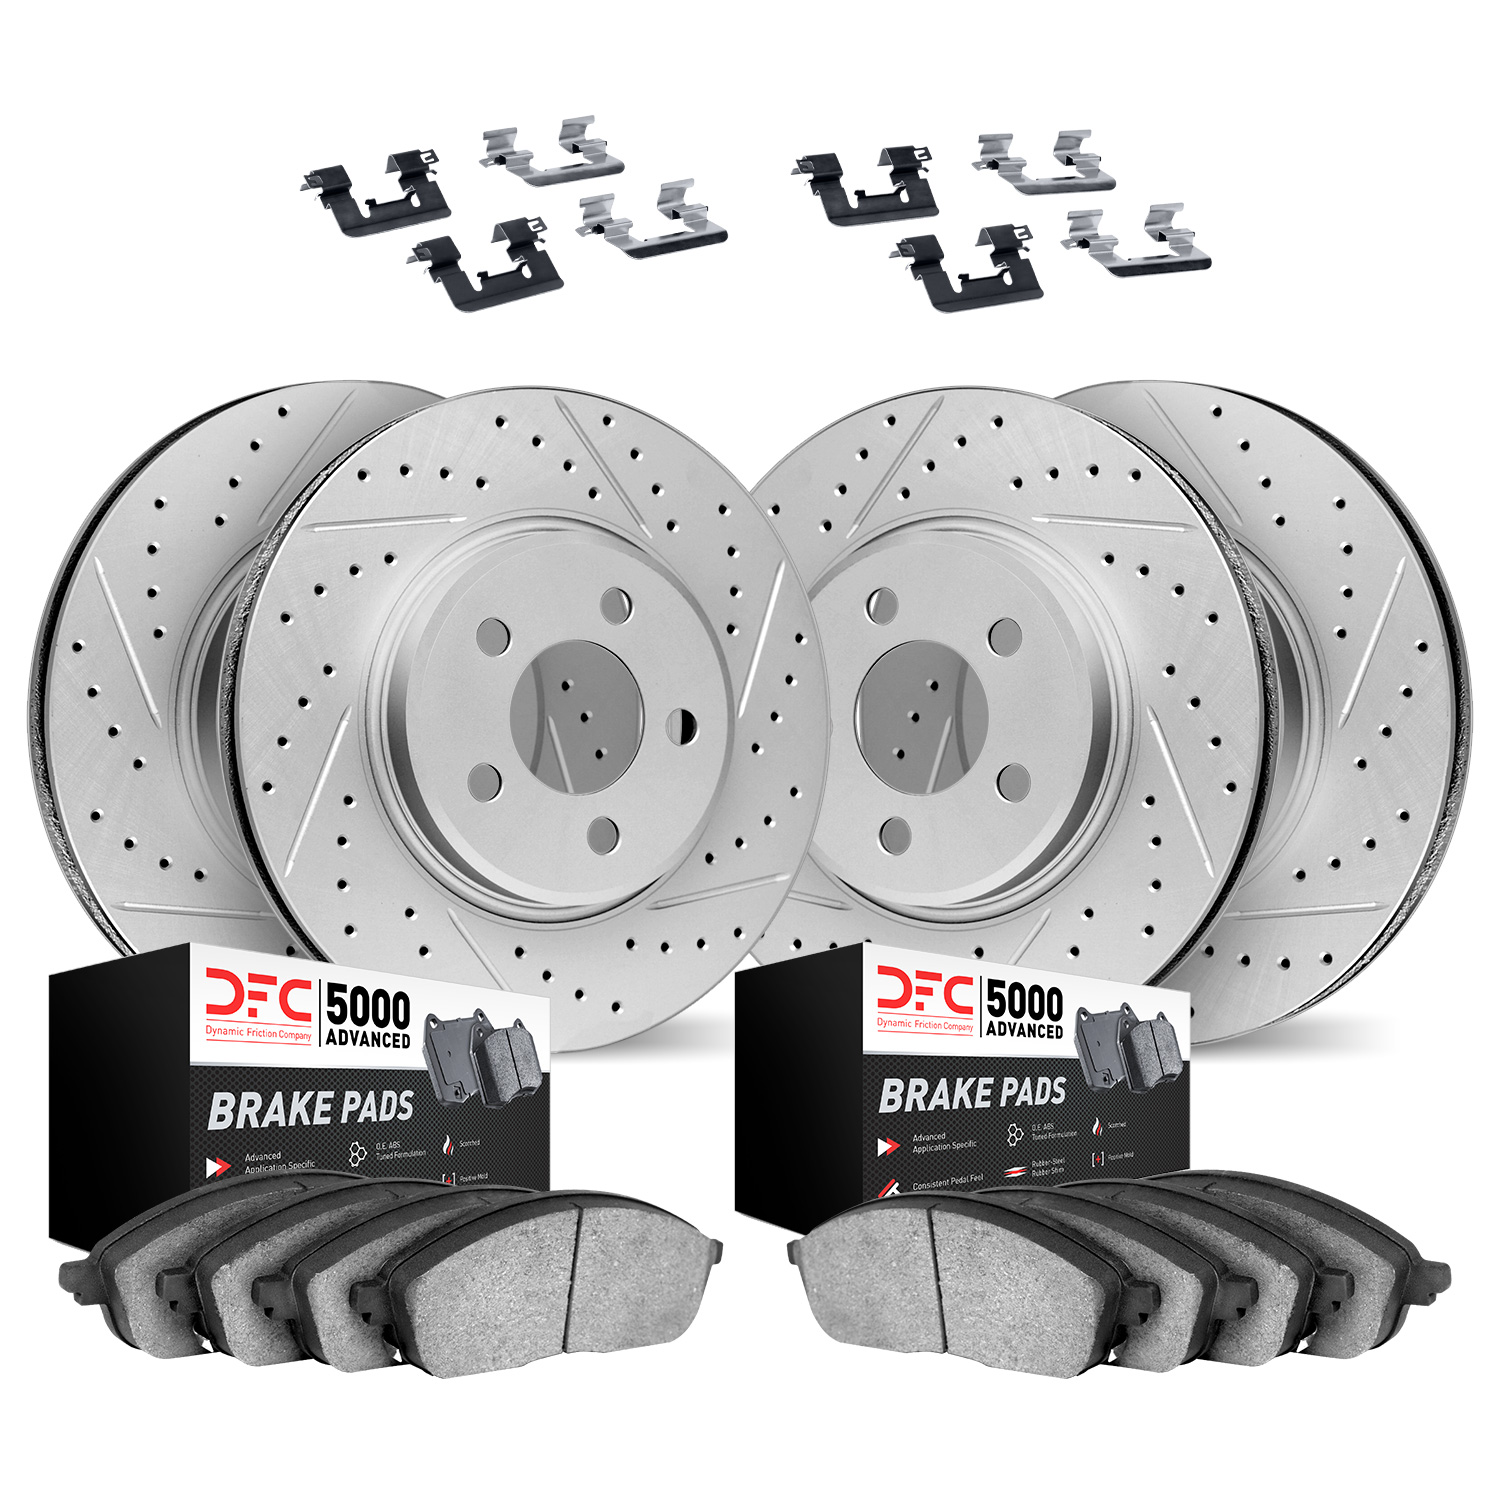 2514-11004 Geoperformance Drilled/Slotted Rotors w/5000 Advanced Brake Pads Kit & Hardware, 2017-2017 Land Rover, Position: Fron